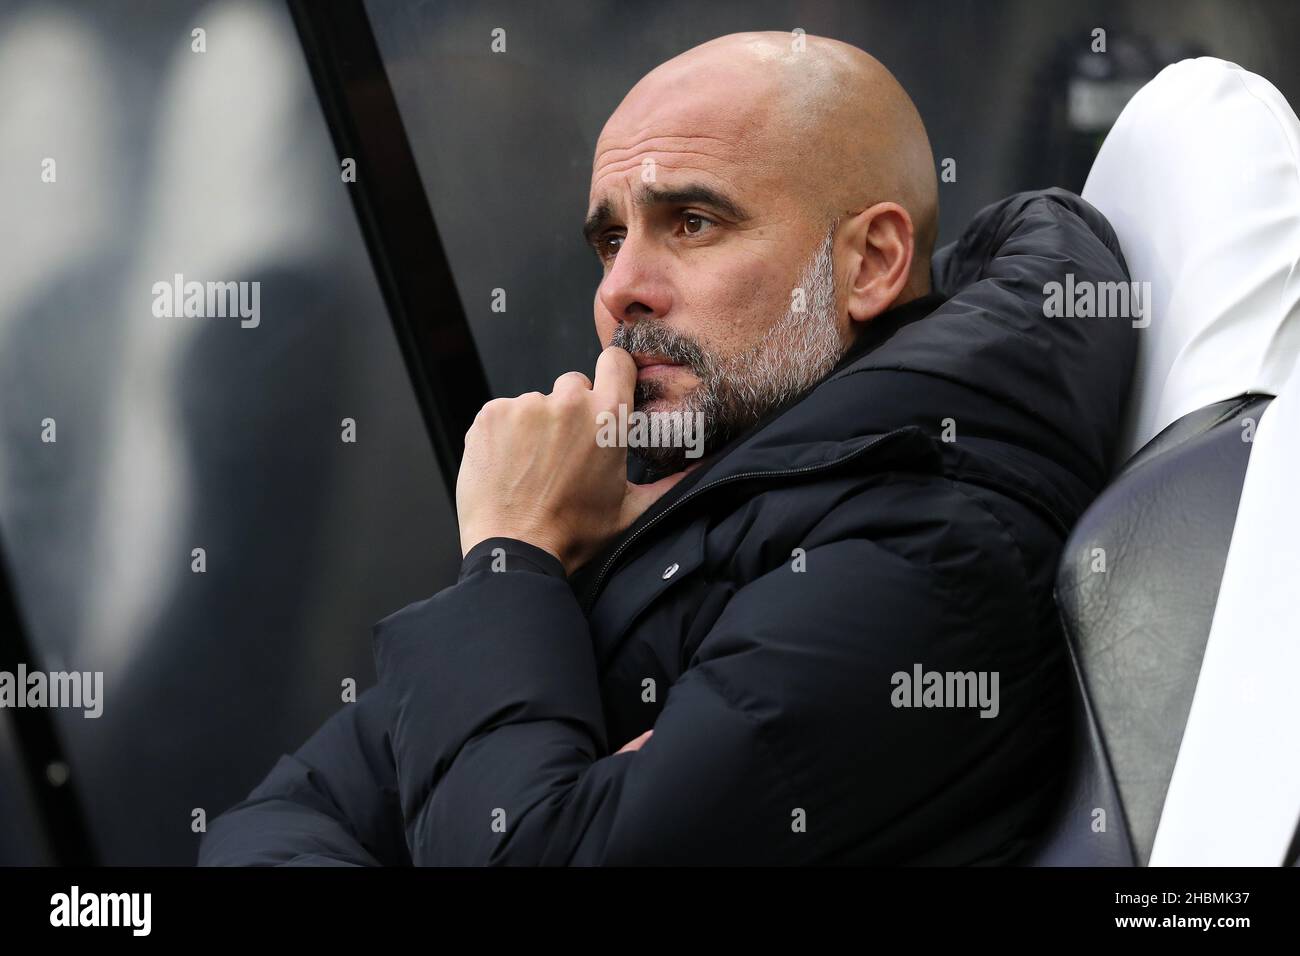 PEP GUARDIOLA, MANCHESTER CITY FC MANAGER, 2021 Stock Photo